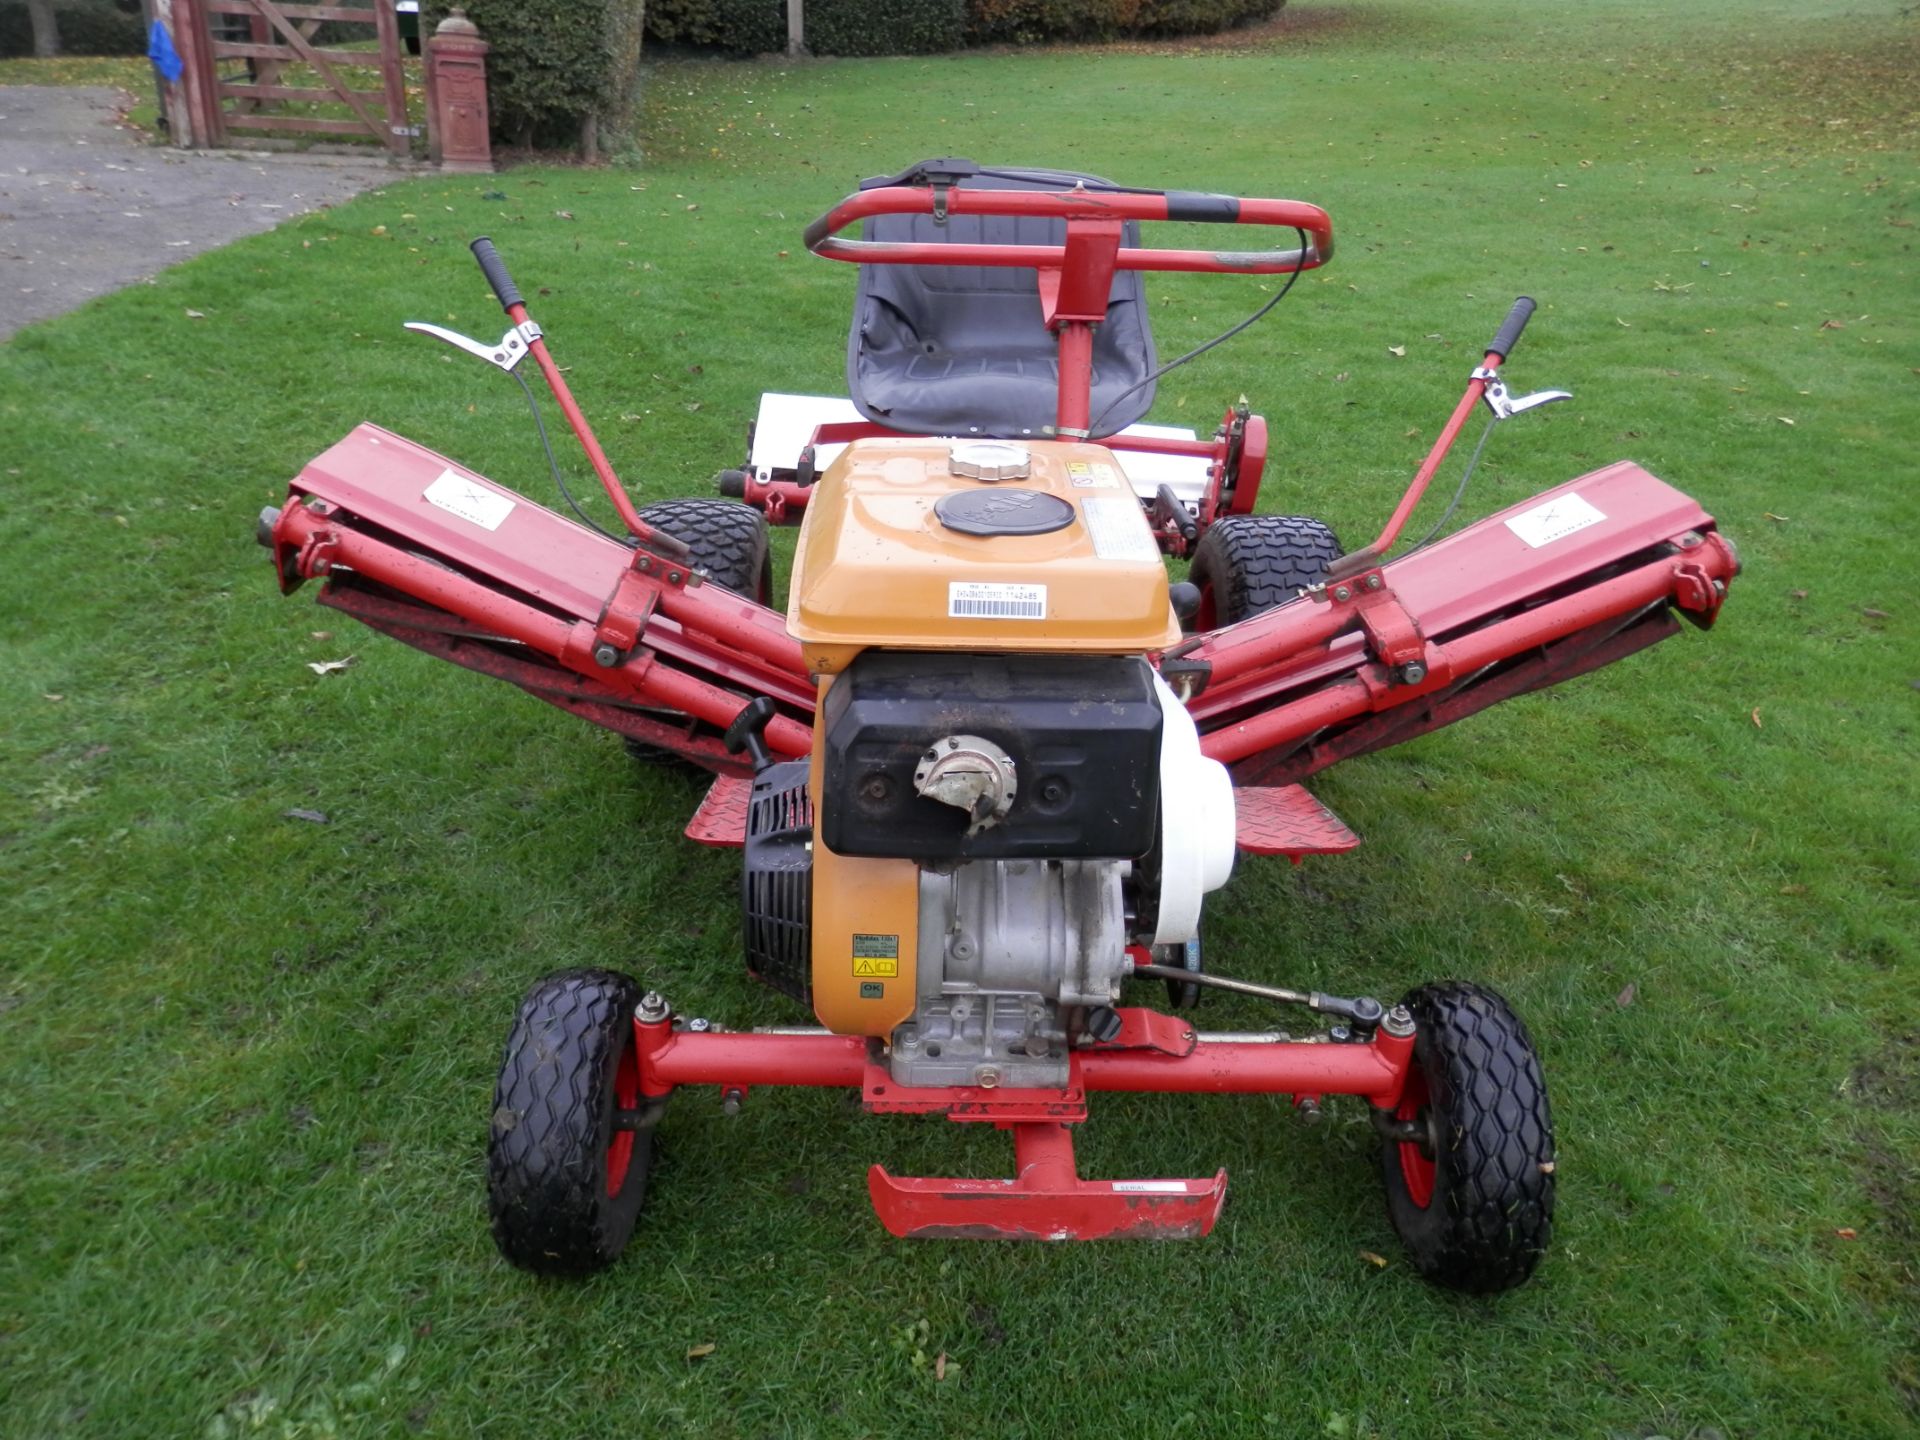 ALL WORKING SAXON TRIPLE MK2 RIDE ON MOWER, UPGRADED WITH GEARS, BRAKE PEDAL & DIFF LOCK. - Image 12 of 14